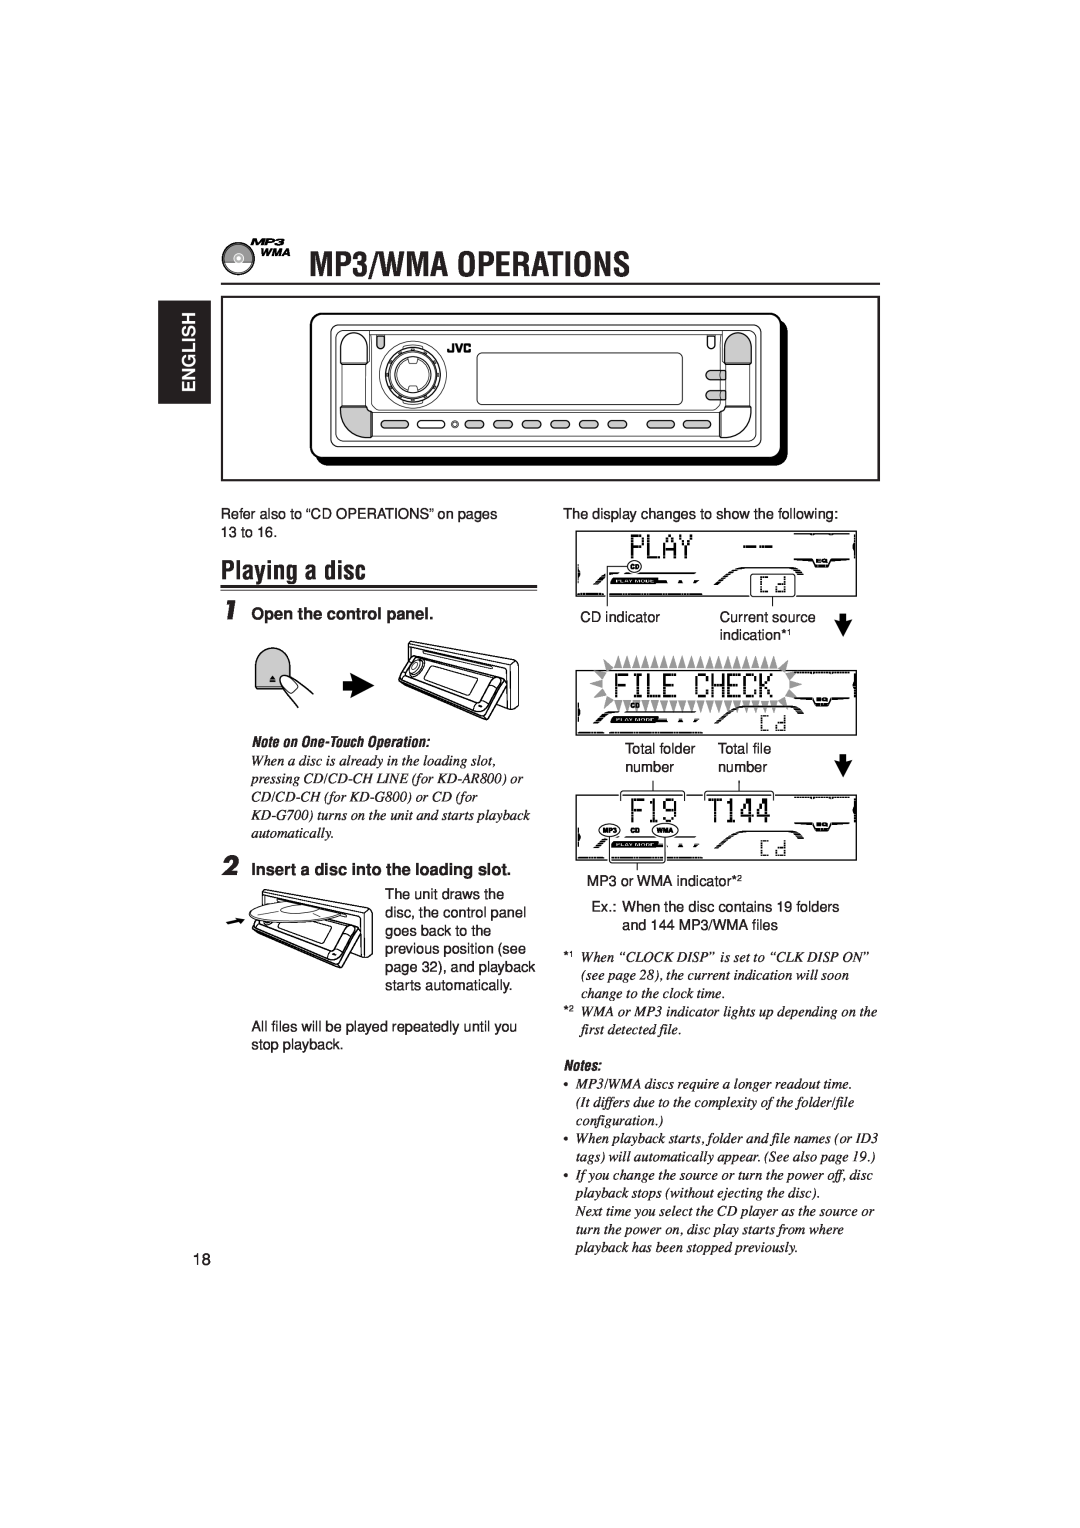 JVC KD-AR800 MP3/WMA OPERATIONS, Playing a disc, 2Insert a disc into the loading slot, English, 1Open the control panel 